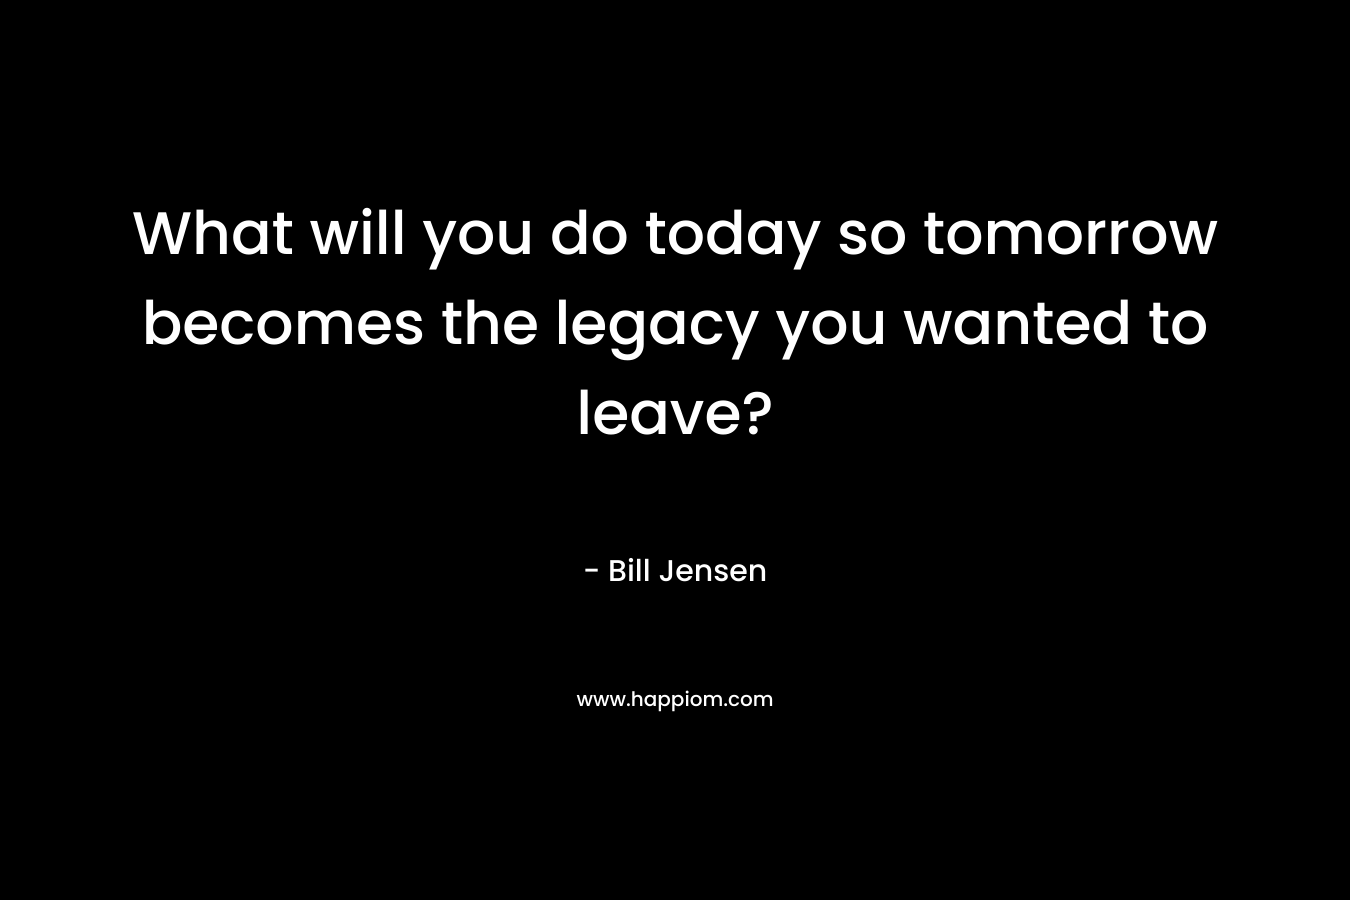 What will you do today so tomorrow becomes the legacy you wanted to leave?